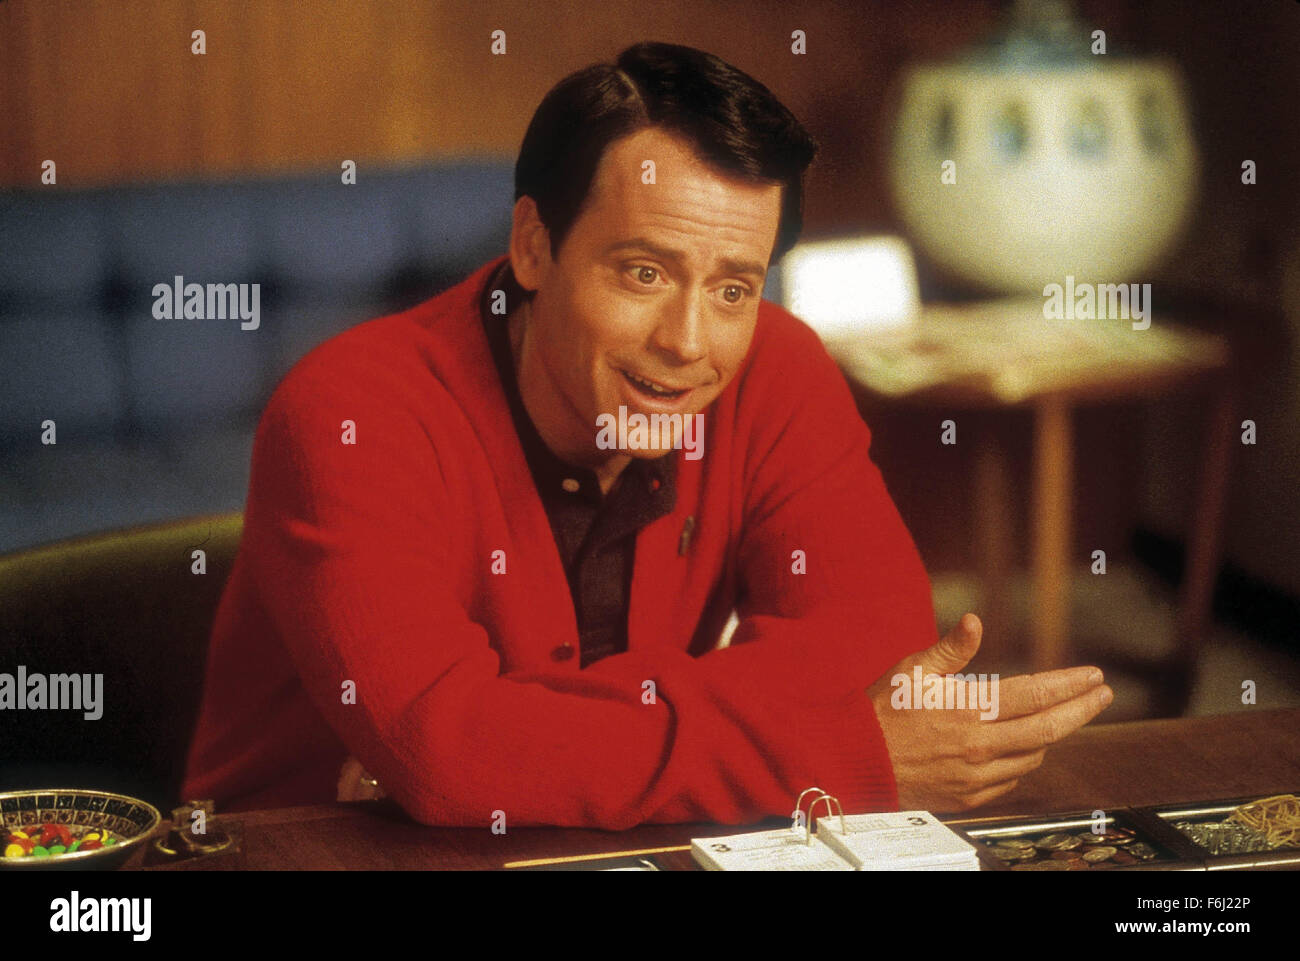 Aug 26, 2002; Hollywood, CA, USA; Actor GREG KINNEAR as Bob Crane stars in the drama 'Auto Focus' directed by Paul Schrader. A story about 'Hogan's Heroes' star Bob Crane and his friendship with John Carpenter. Stock Photo